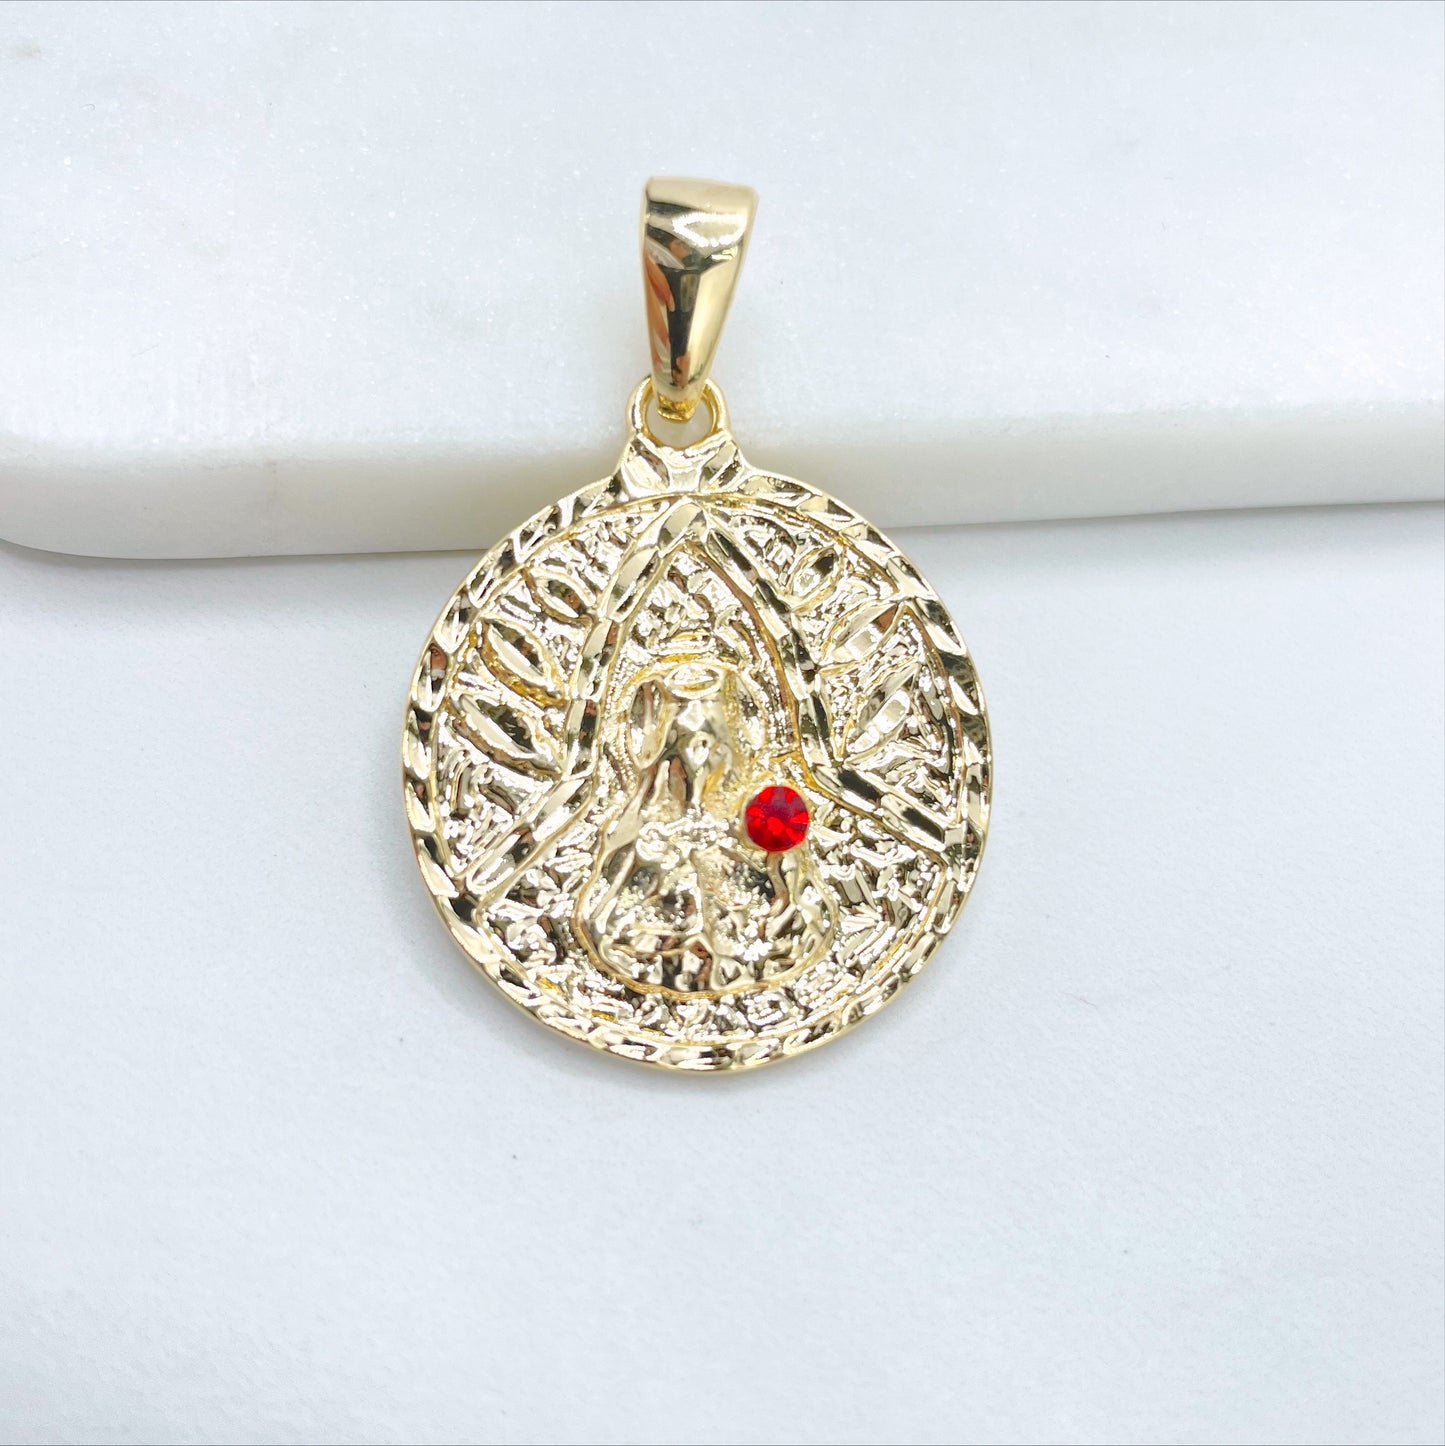 18k Gold Filled Santa Barbara with Red or Pink Cubic Zirconia, Texturized Charm Pendant, Wholesale Jewelry Making Supplies